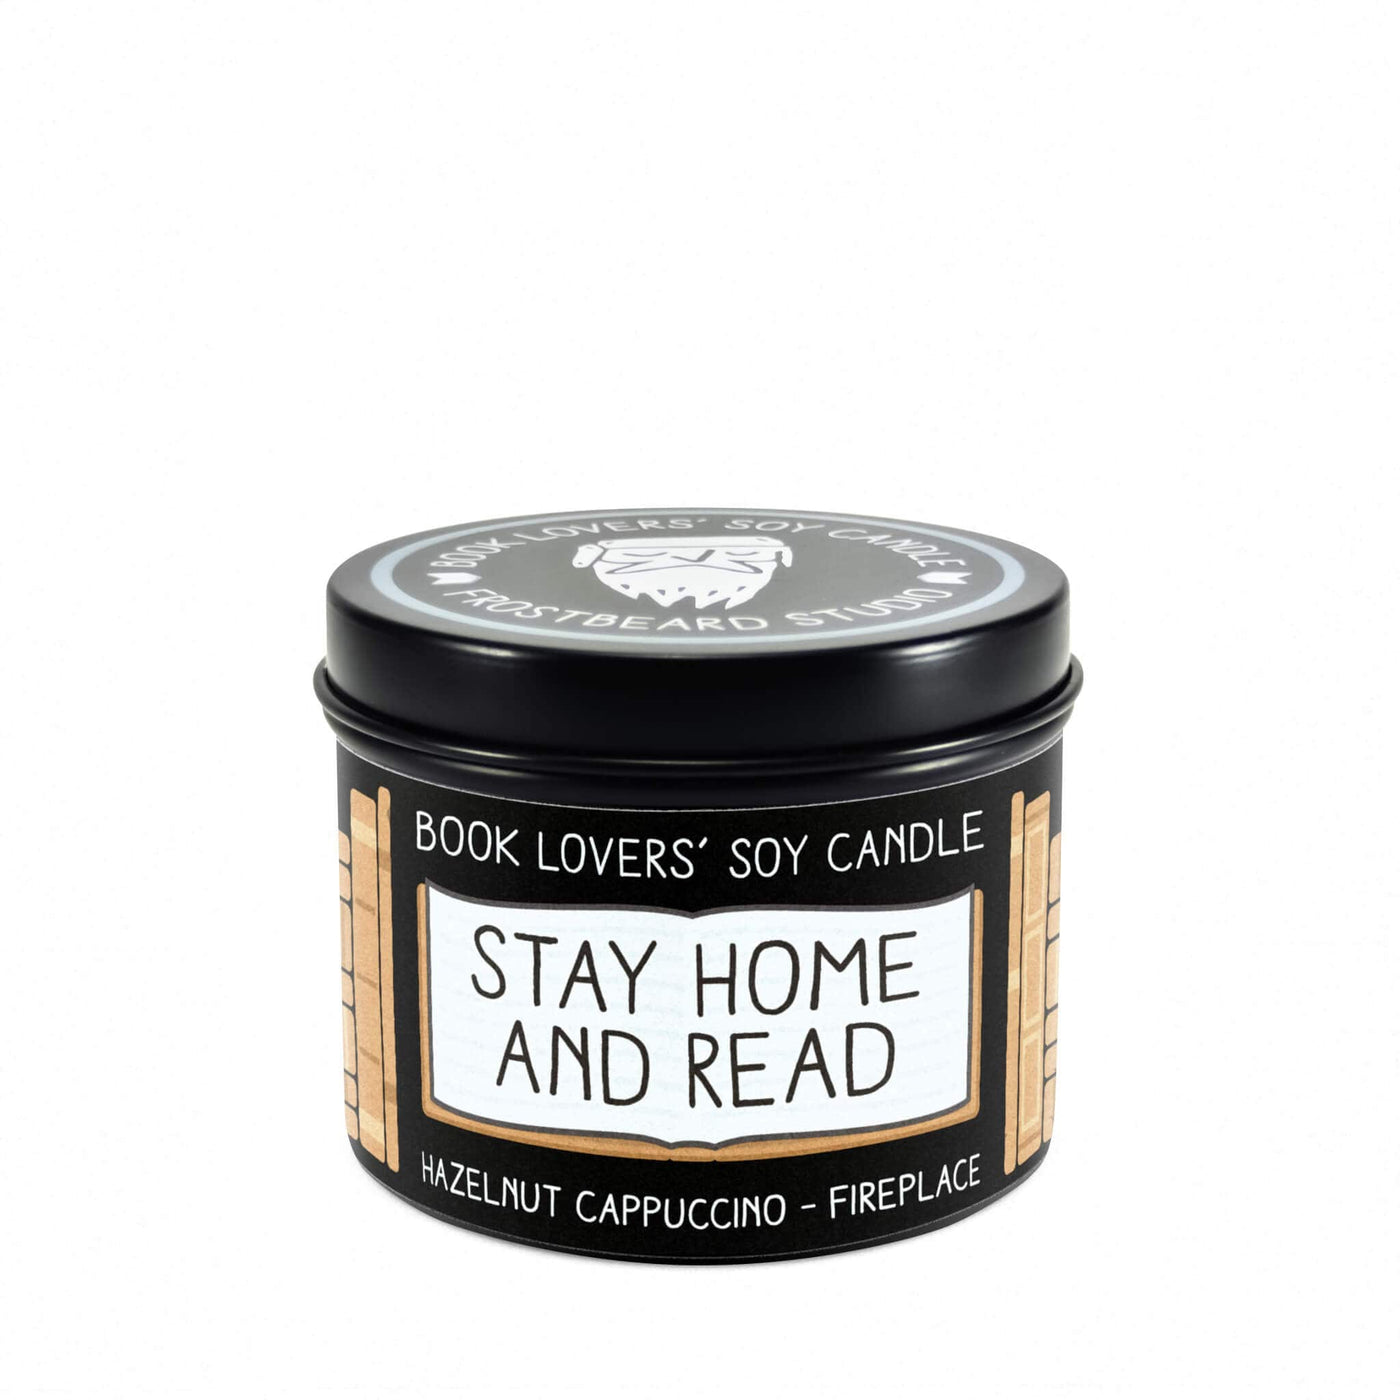 Stay Home and Read - 4 oz Tin - Book Lovers' Soy Candle - Frostbeard Studio